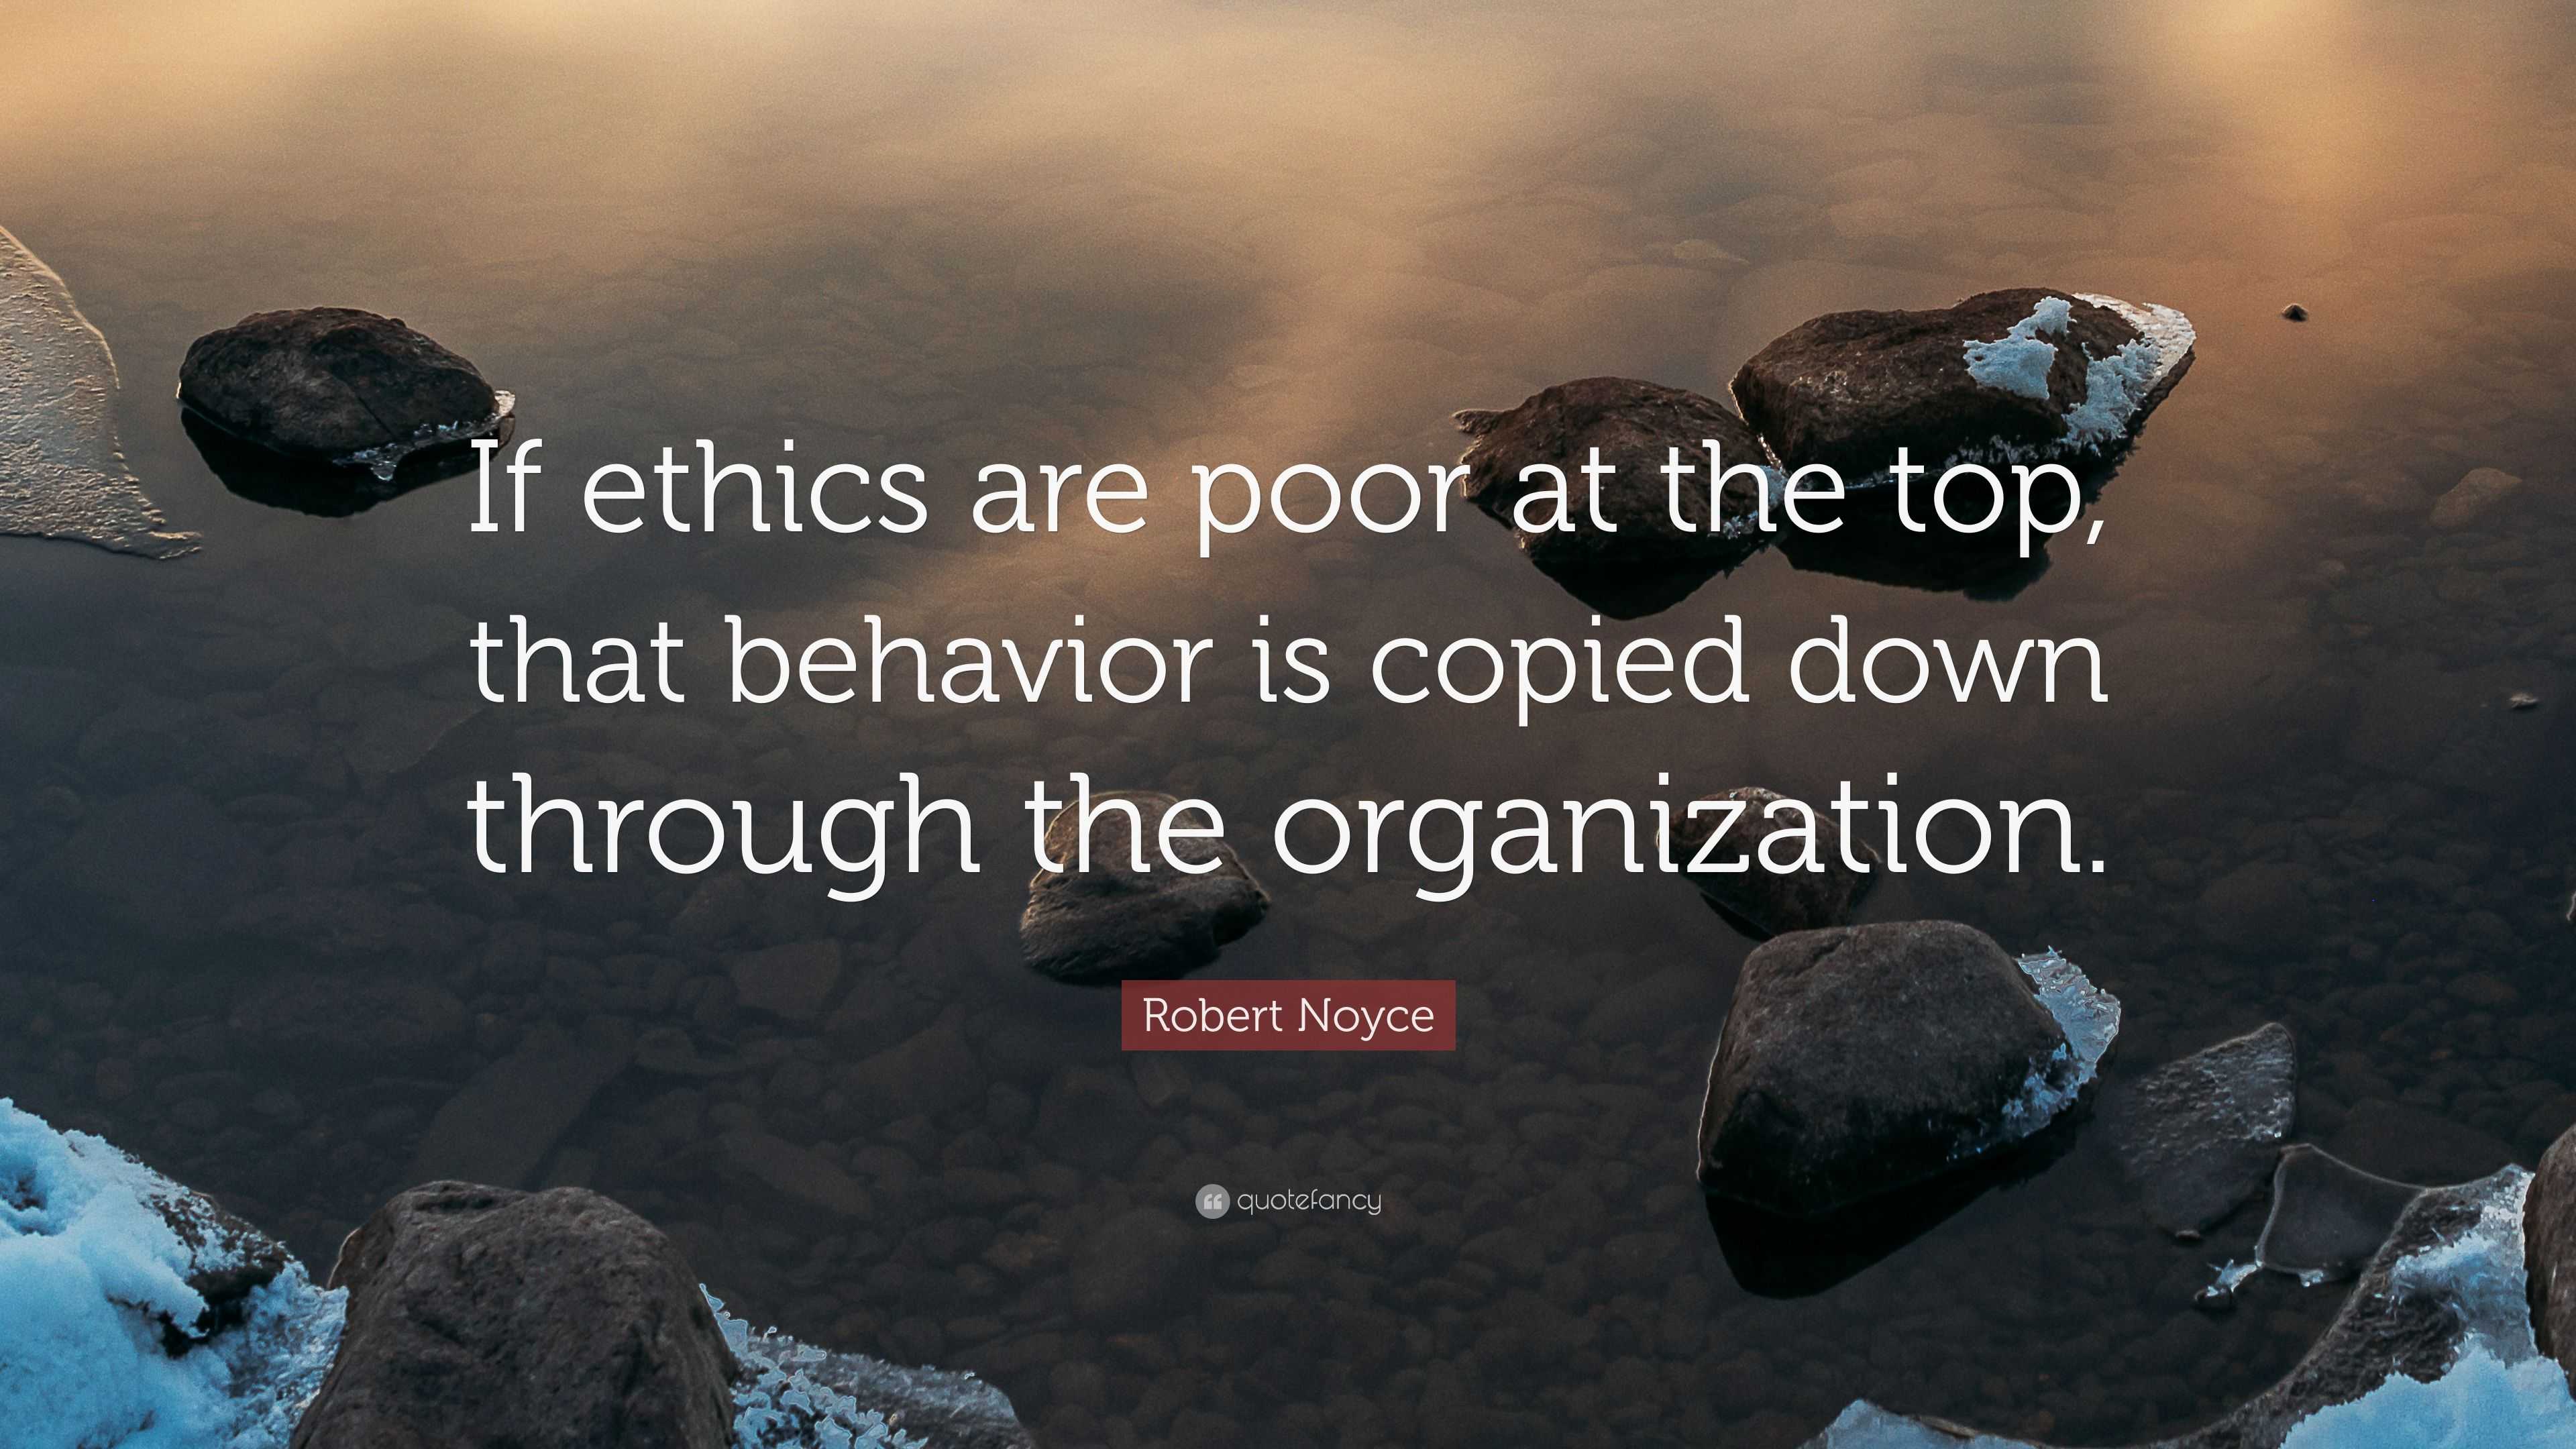 Robert Noyce Quote: “If ethics are poor at the top, that behavior is